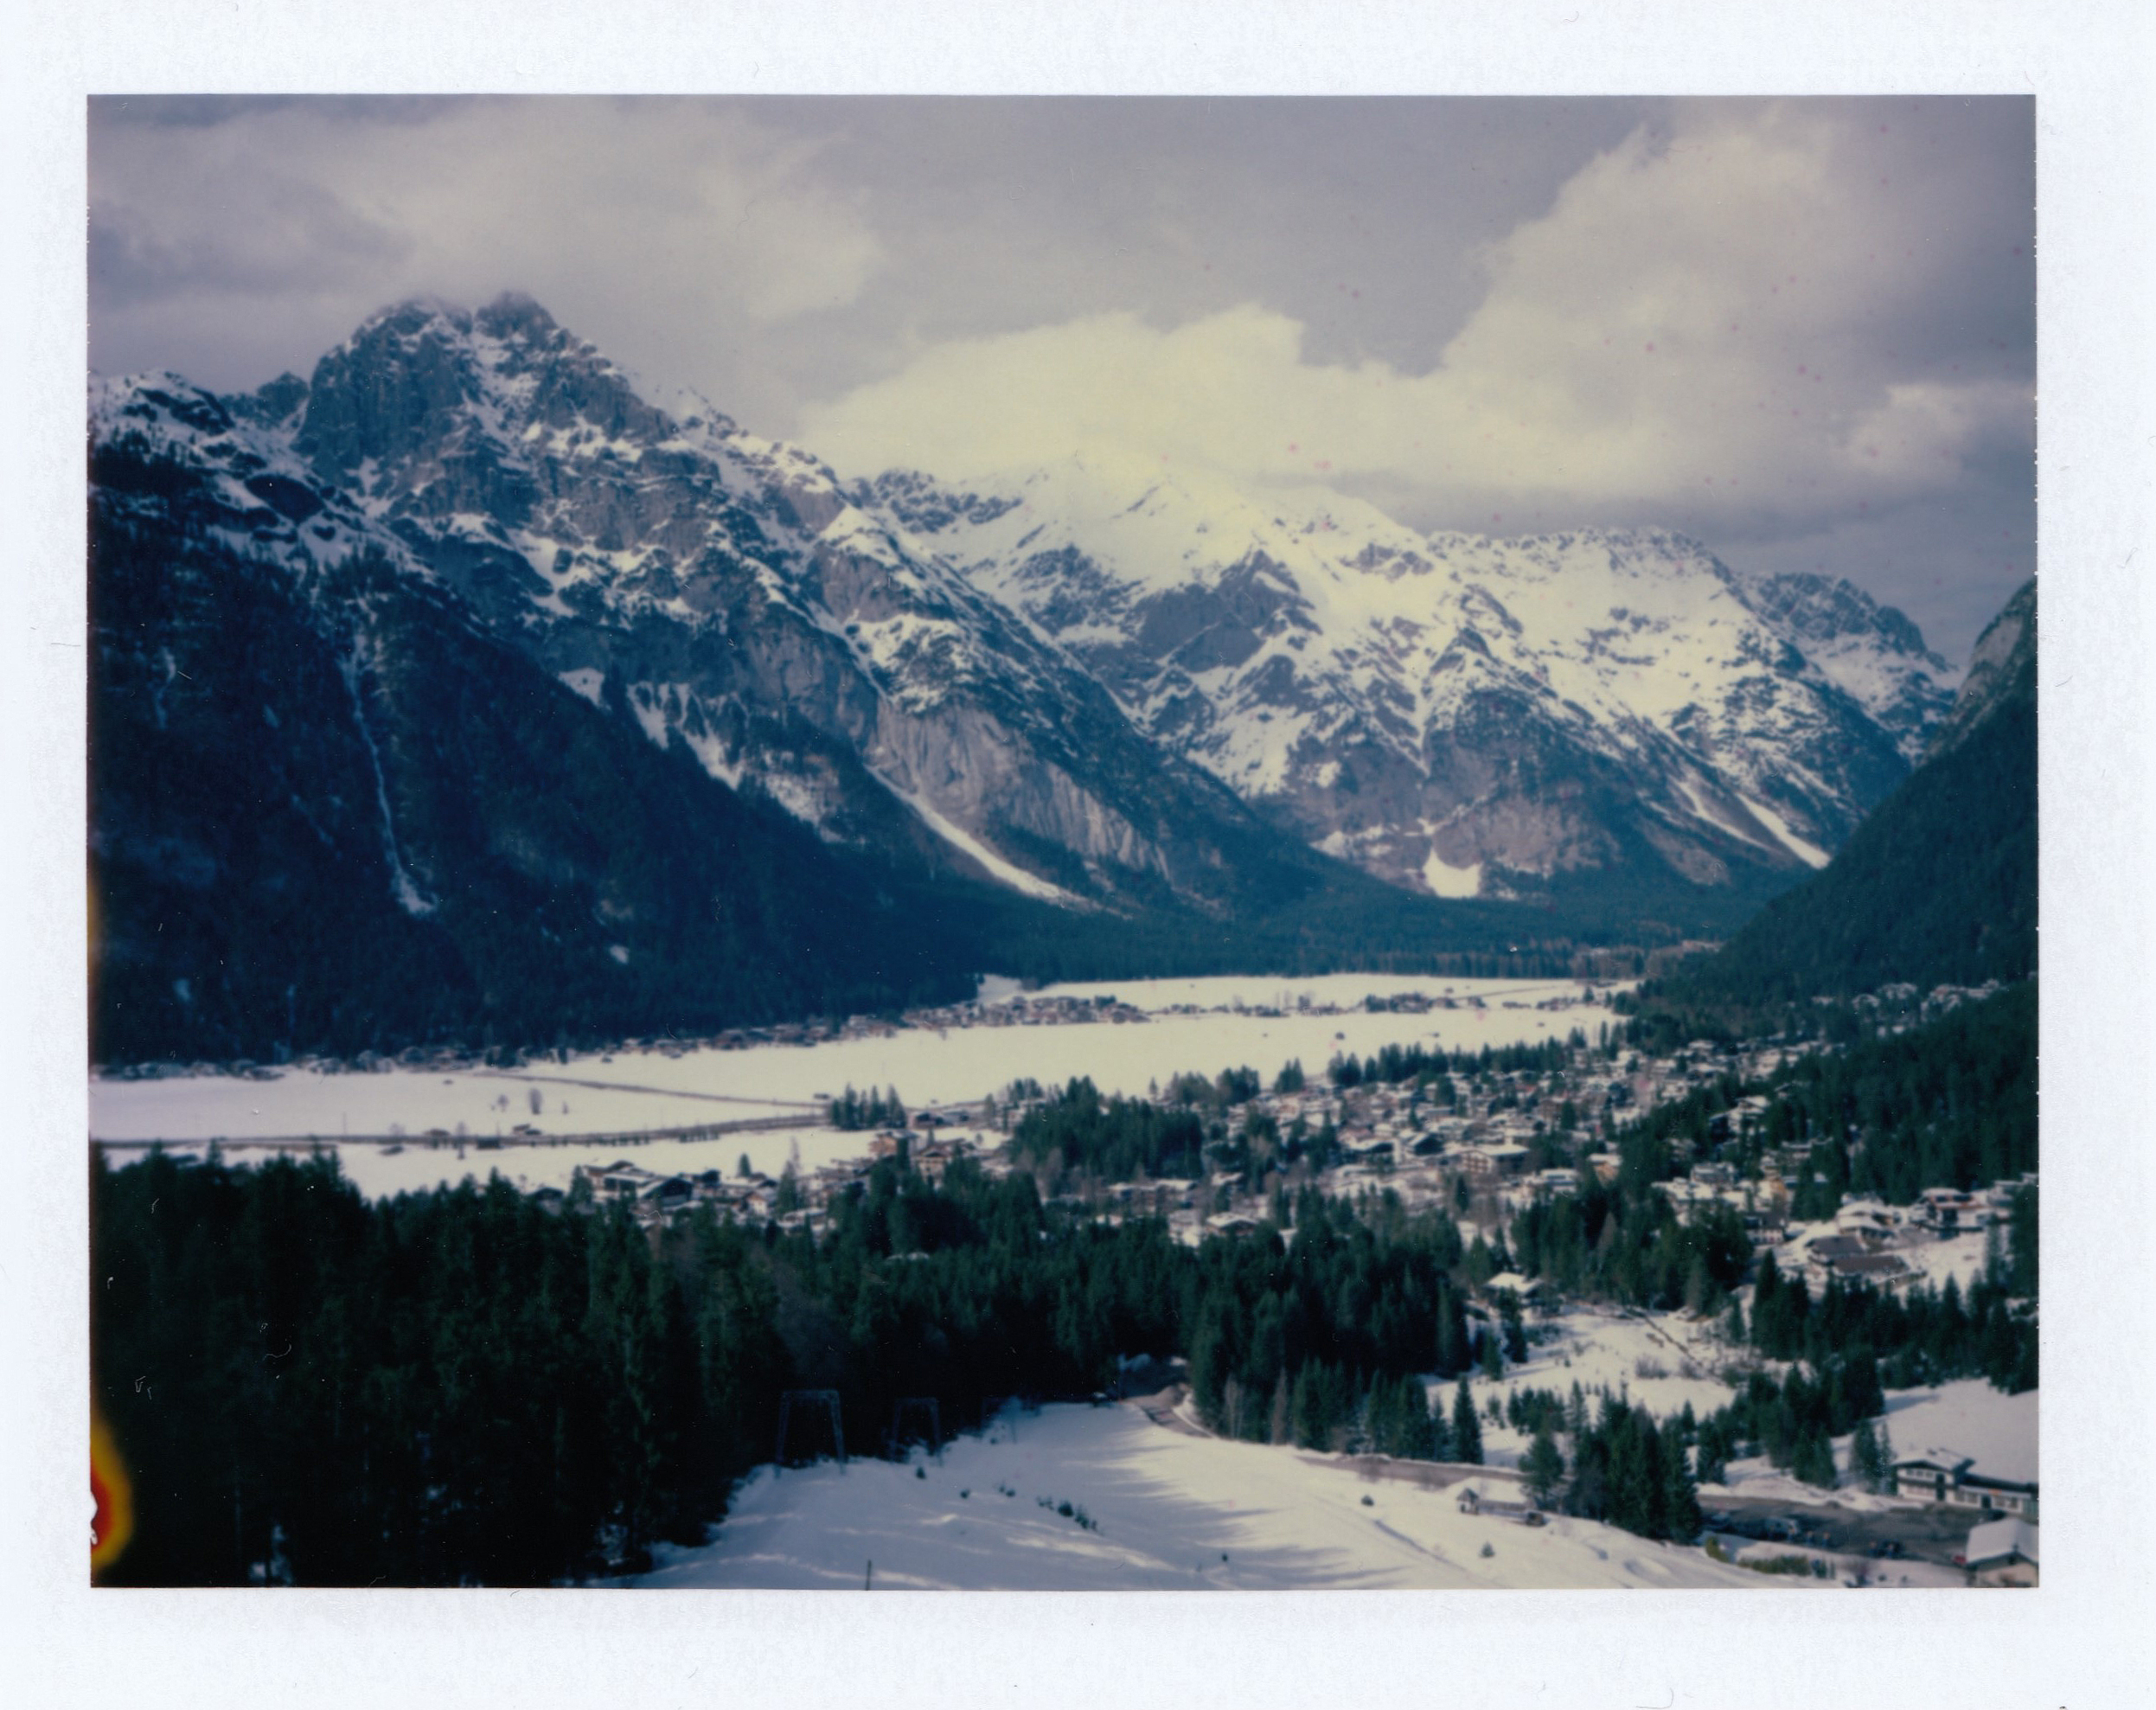 My First Time in Tyrol | Land Camera 350 | FP100c | Ioana Taut